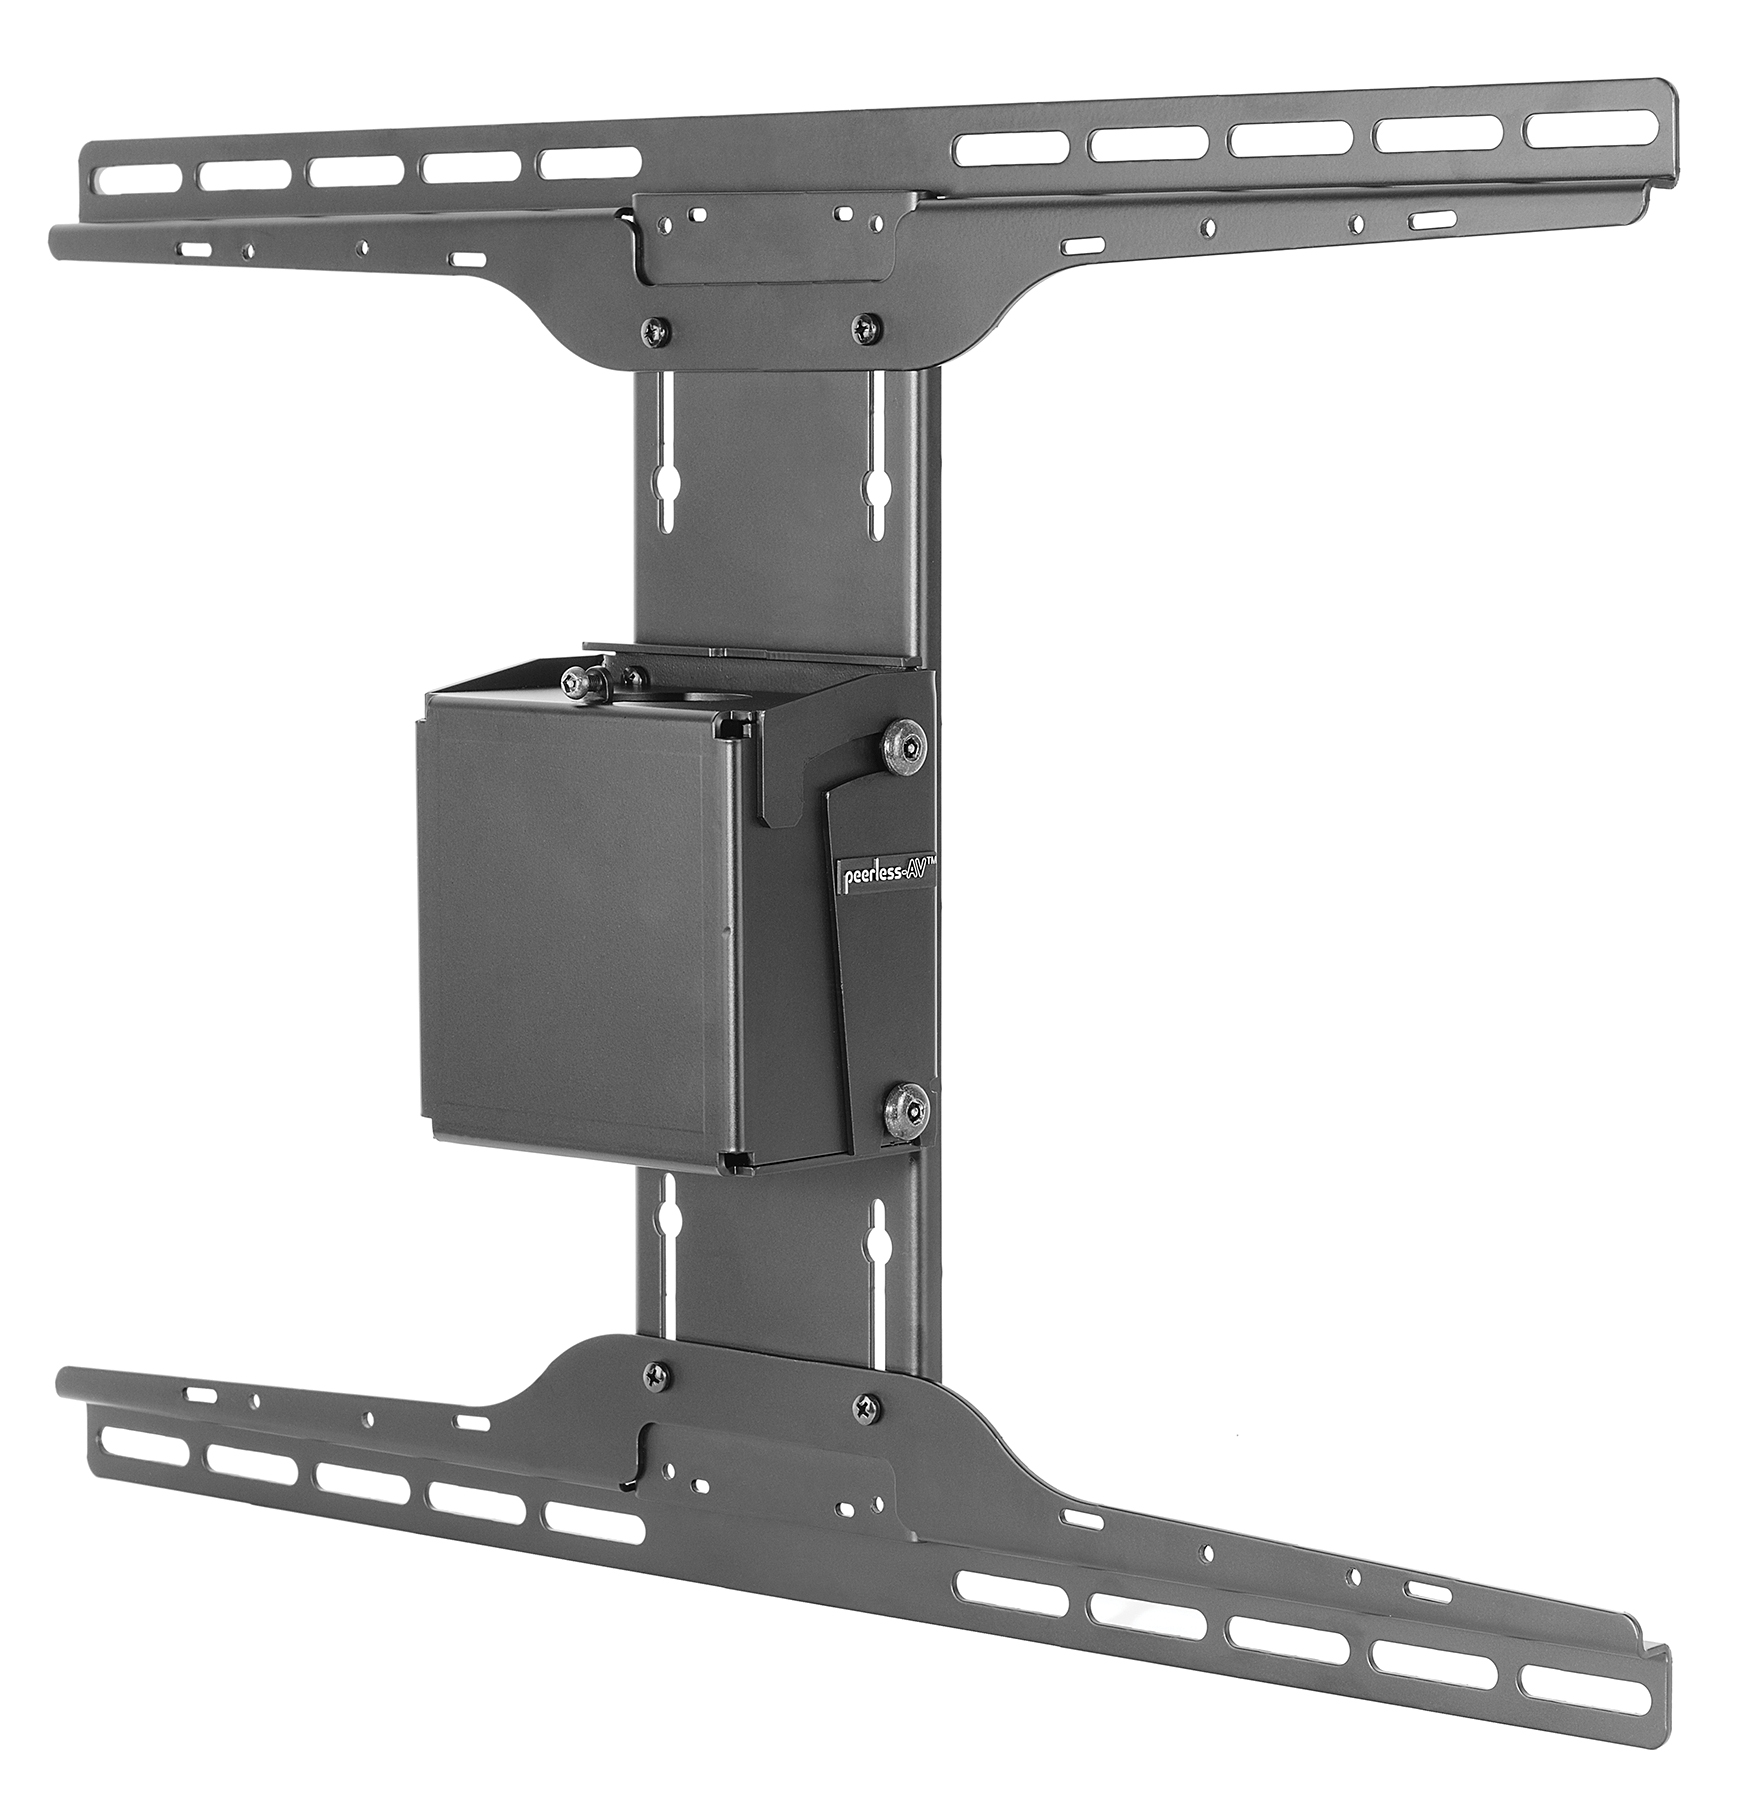 PLCM-2-UNL SmartMount Ceiling Mount with I-Shaped Adaptor and Tilt Box for 32" to 90" Displays